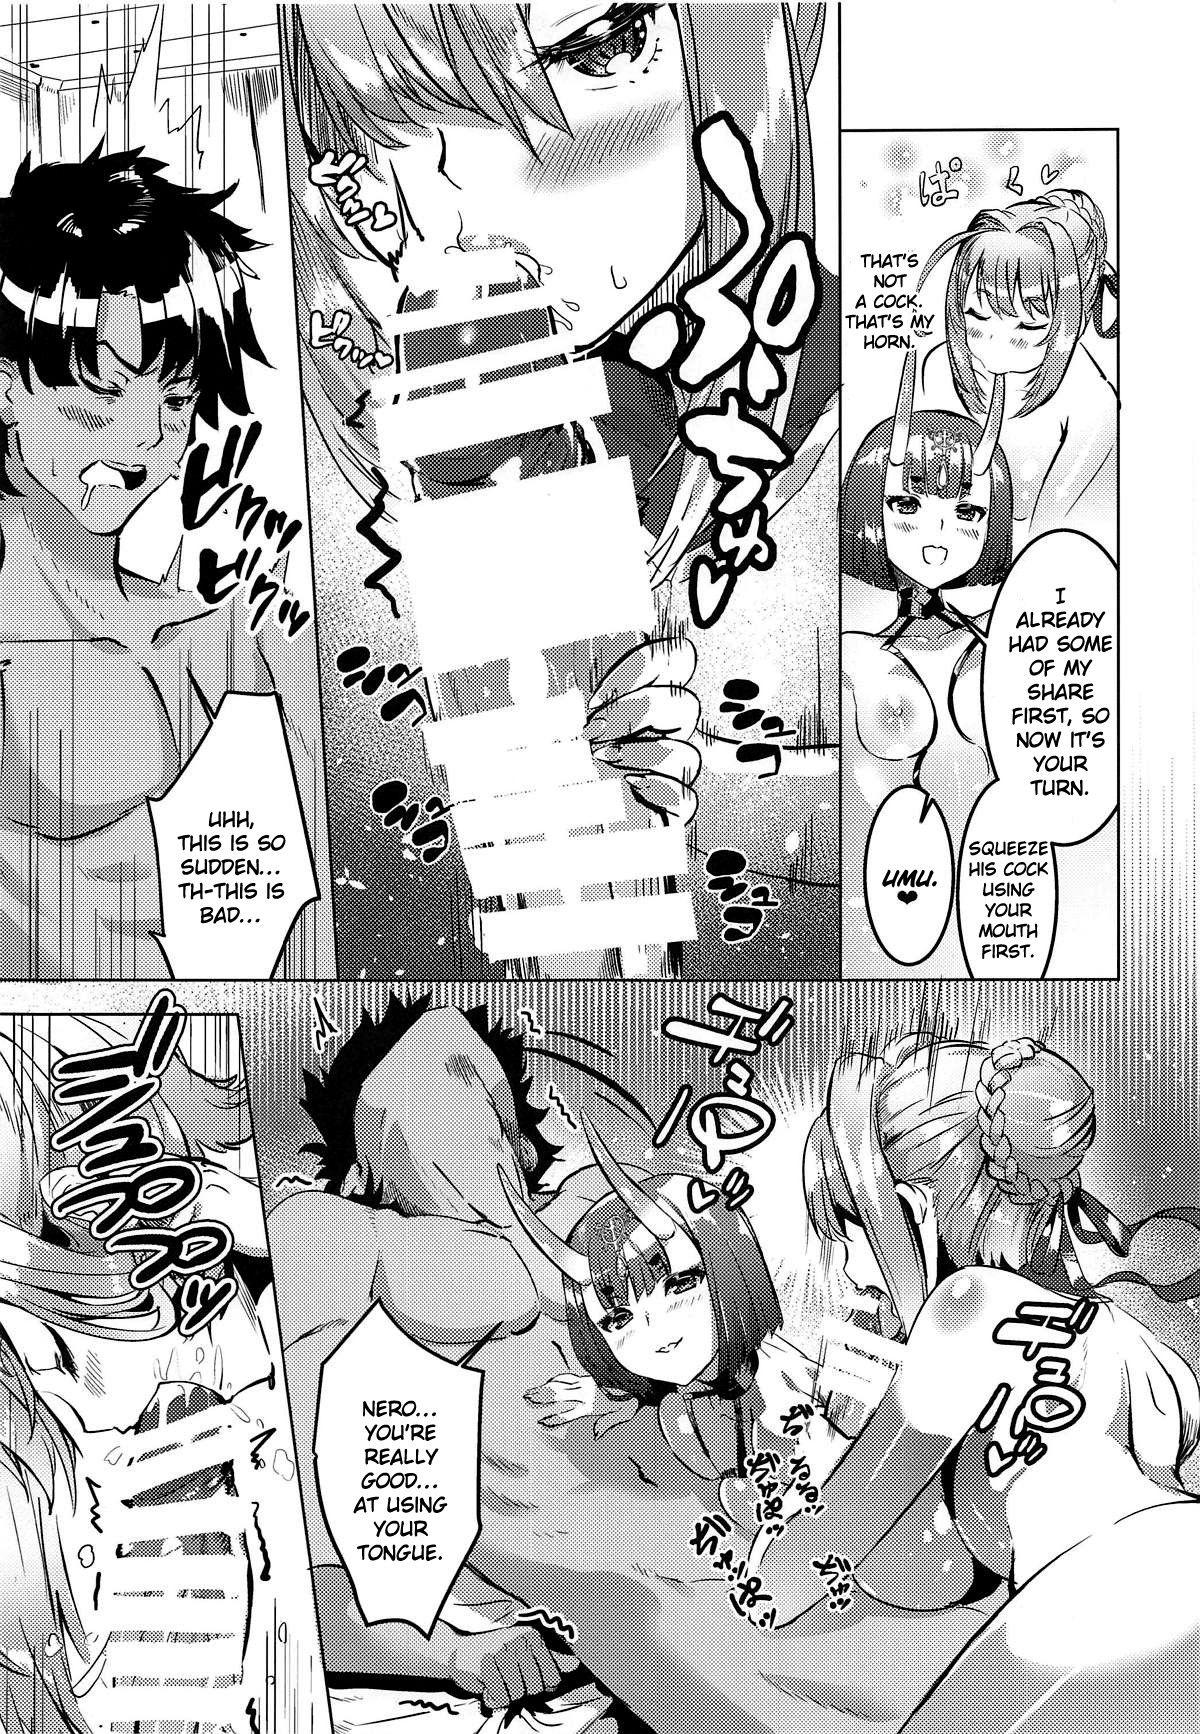 Bathroom Koutei to Oni no Erohon | An Ero Book About an Emperor and an Oni - Fate grand order Amateur Vids - Page 6